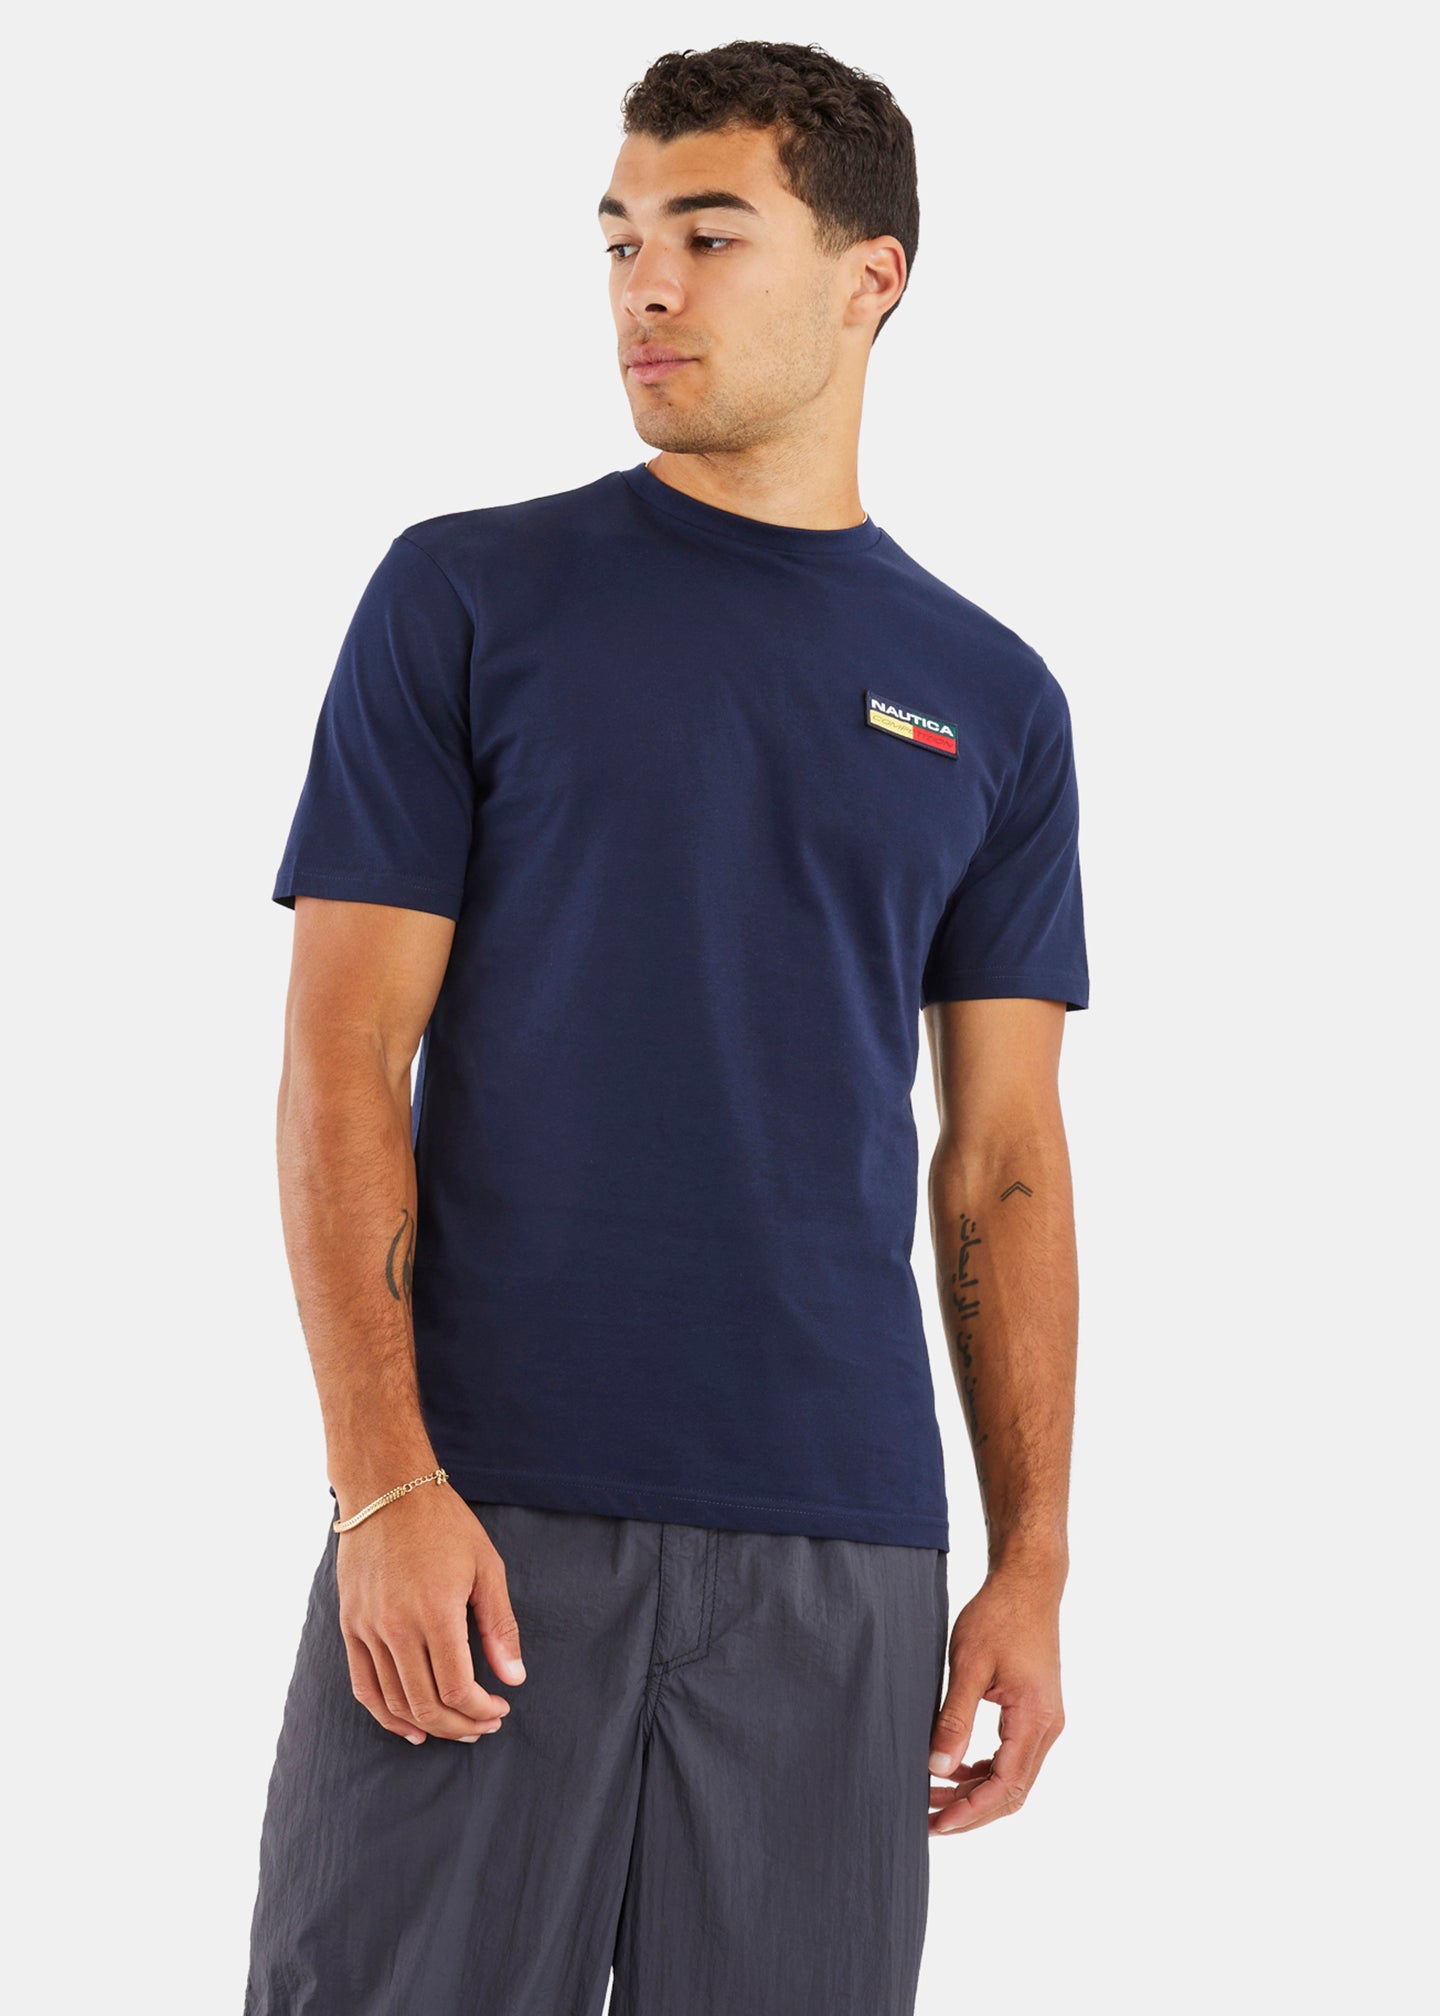 Nautica Competition Timor T-Shirt - Dark Navy - Front